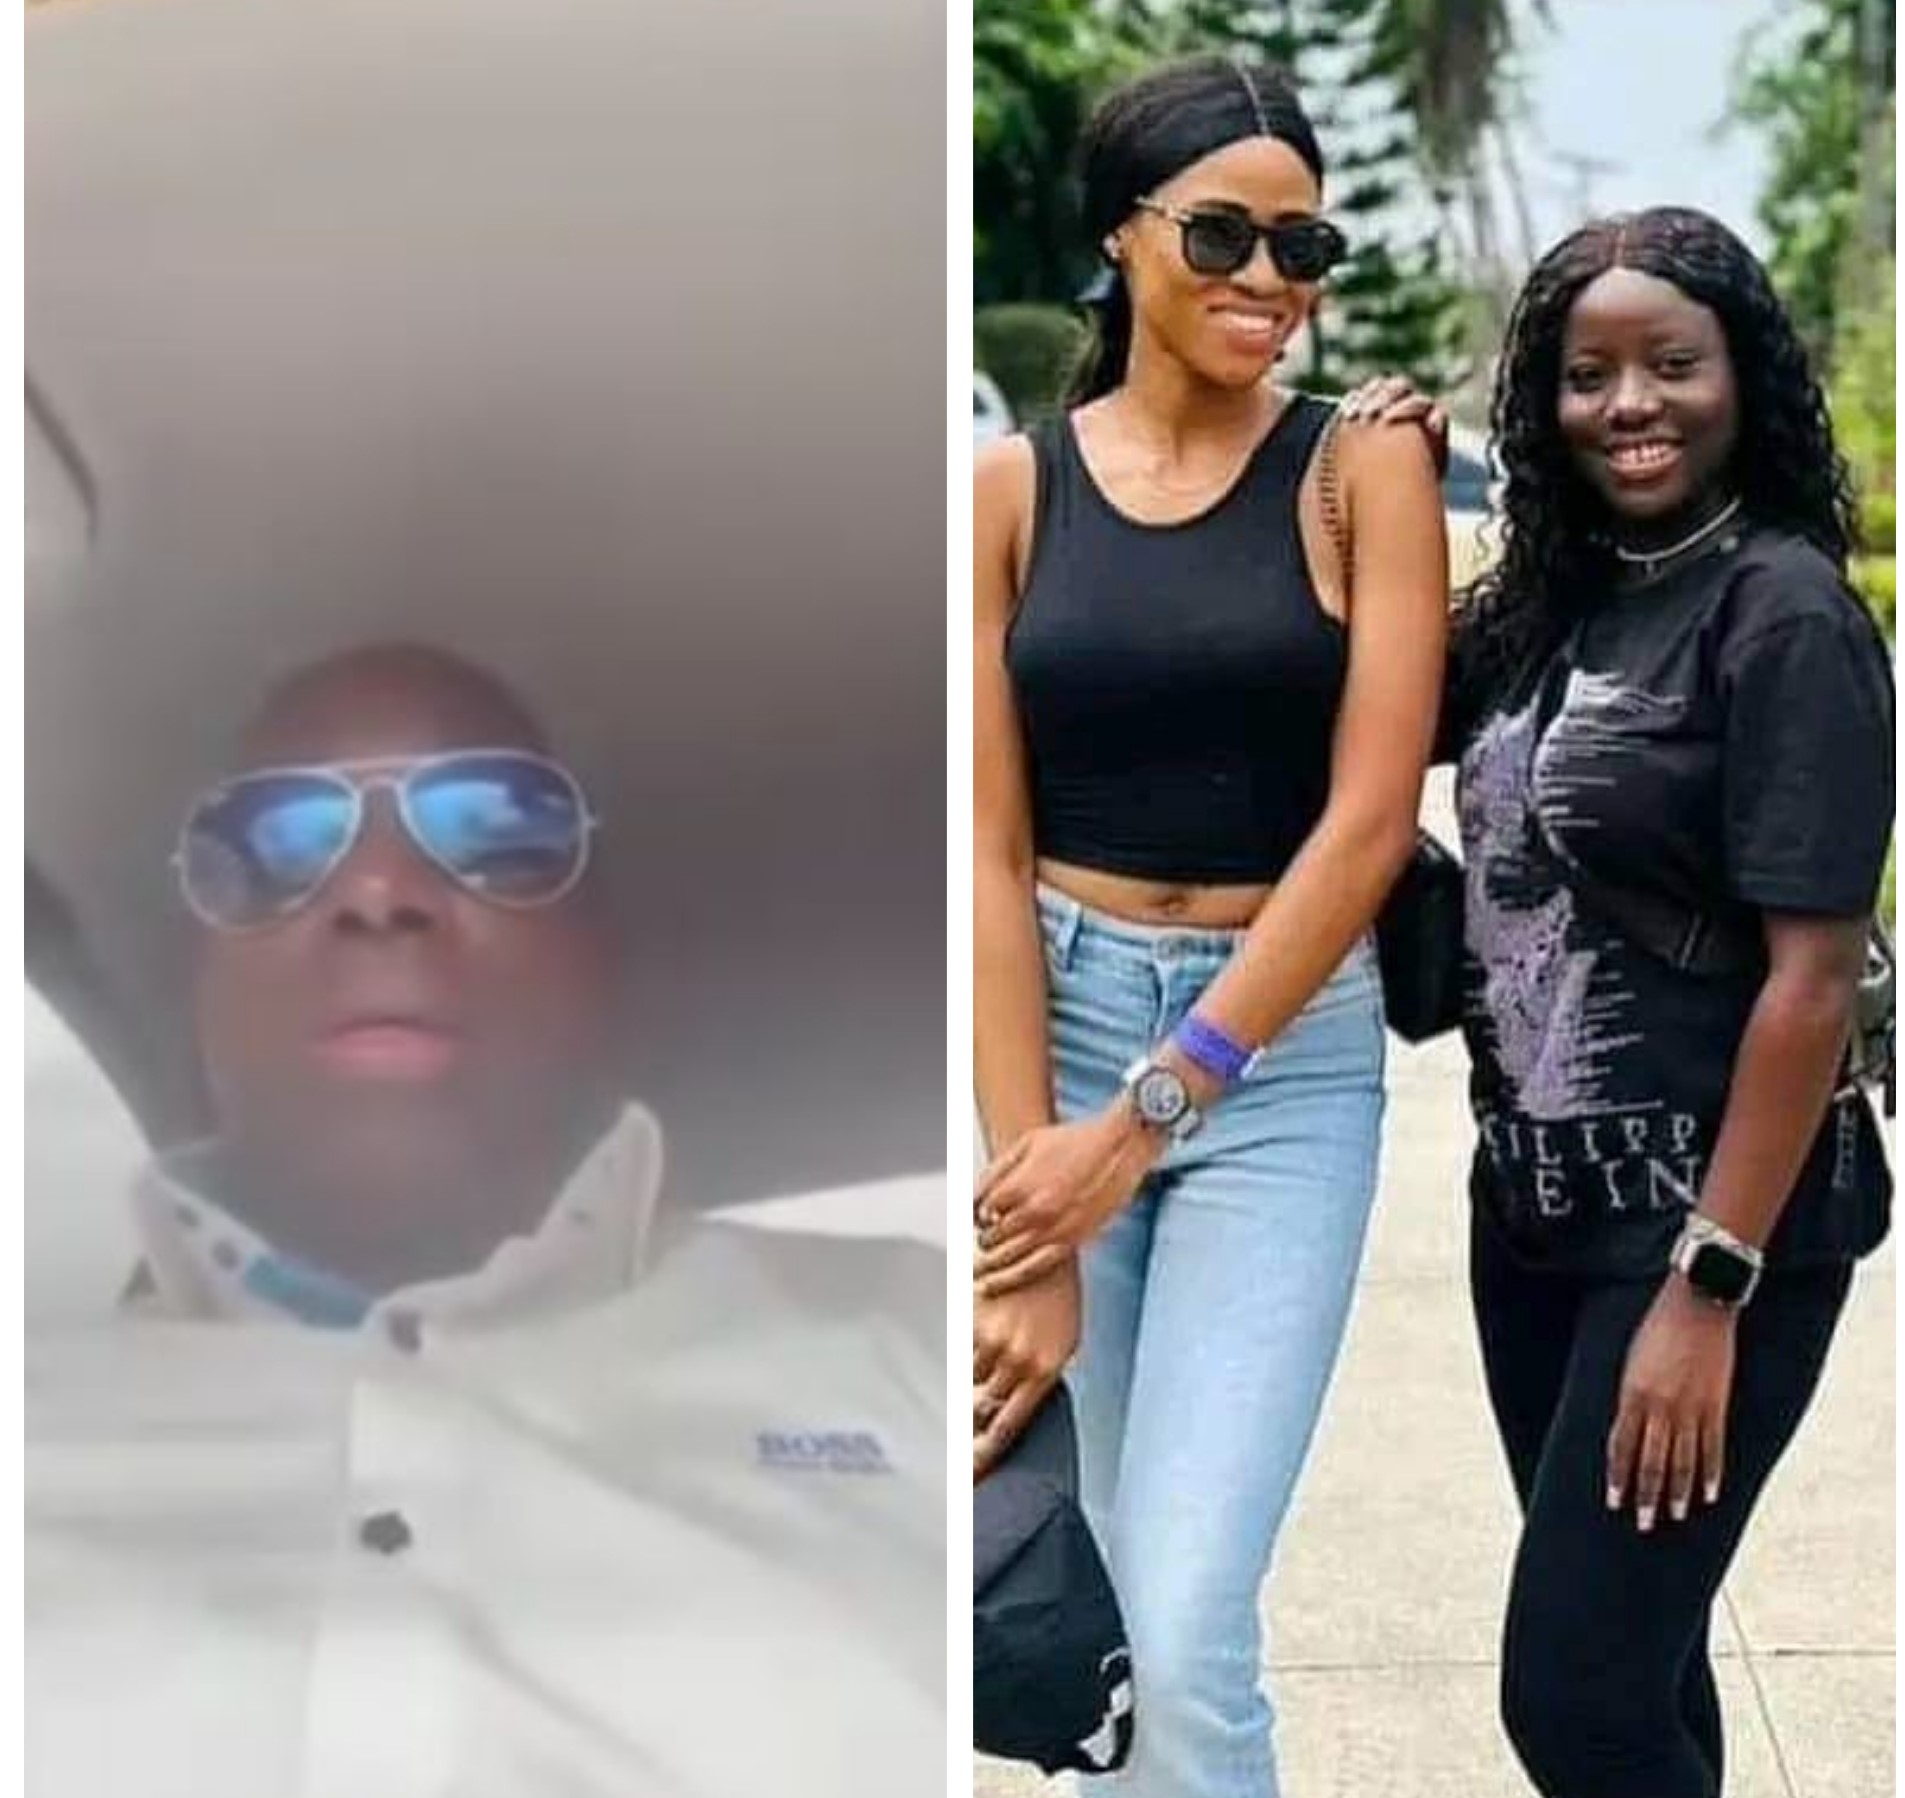 Breaking: Suspect in the disappearance of two friends killed while being transported to Abuja as investigation reveals he belongs to organ harvesting syndicate (video)